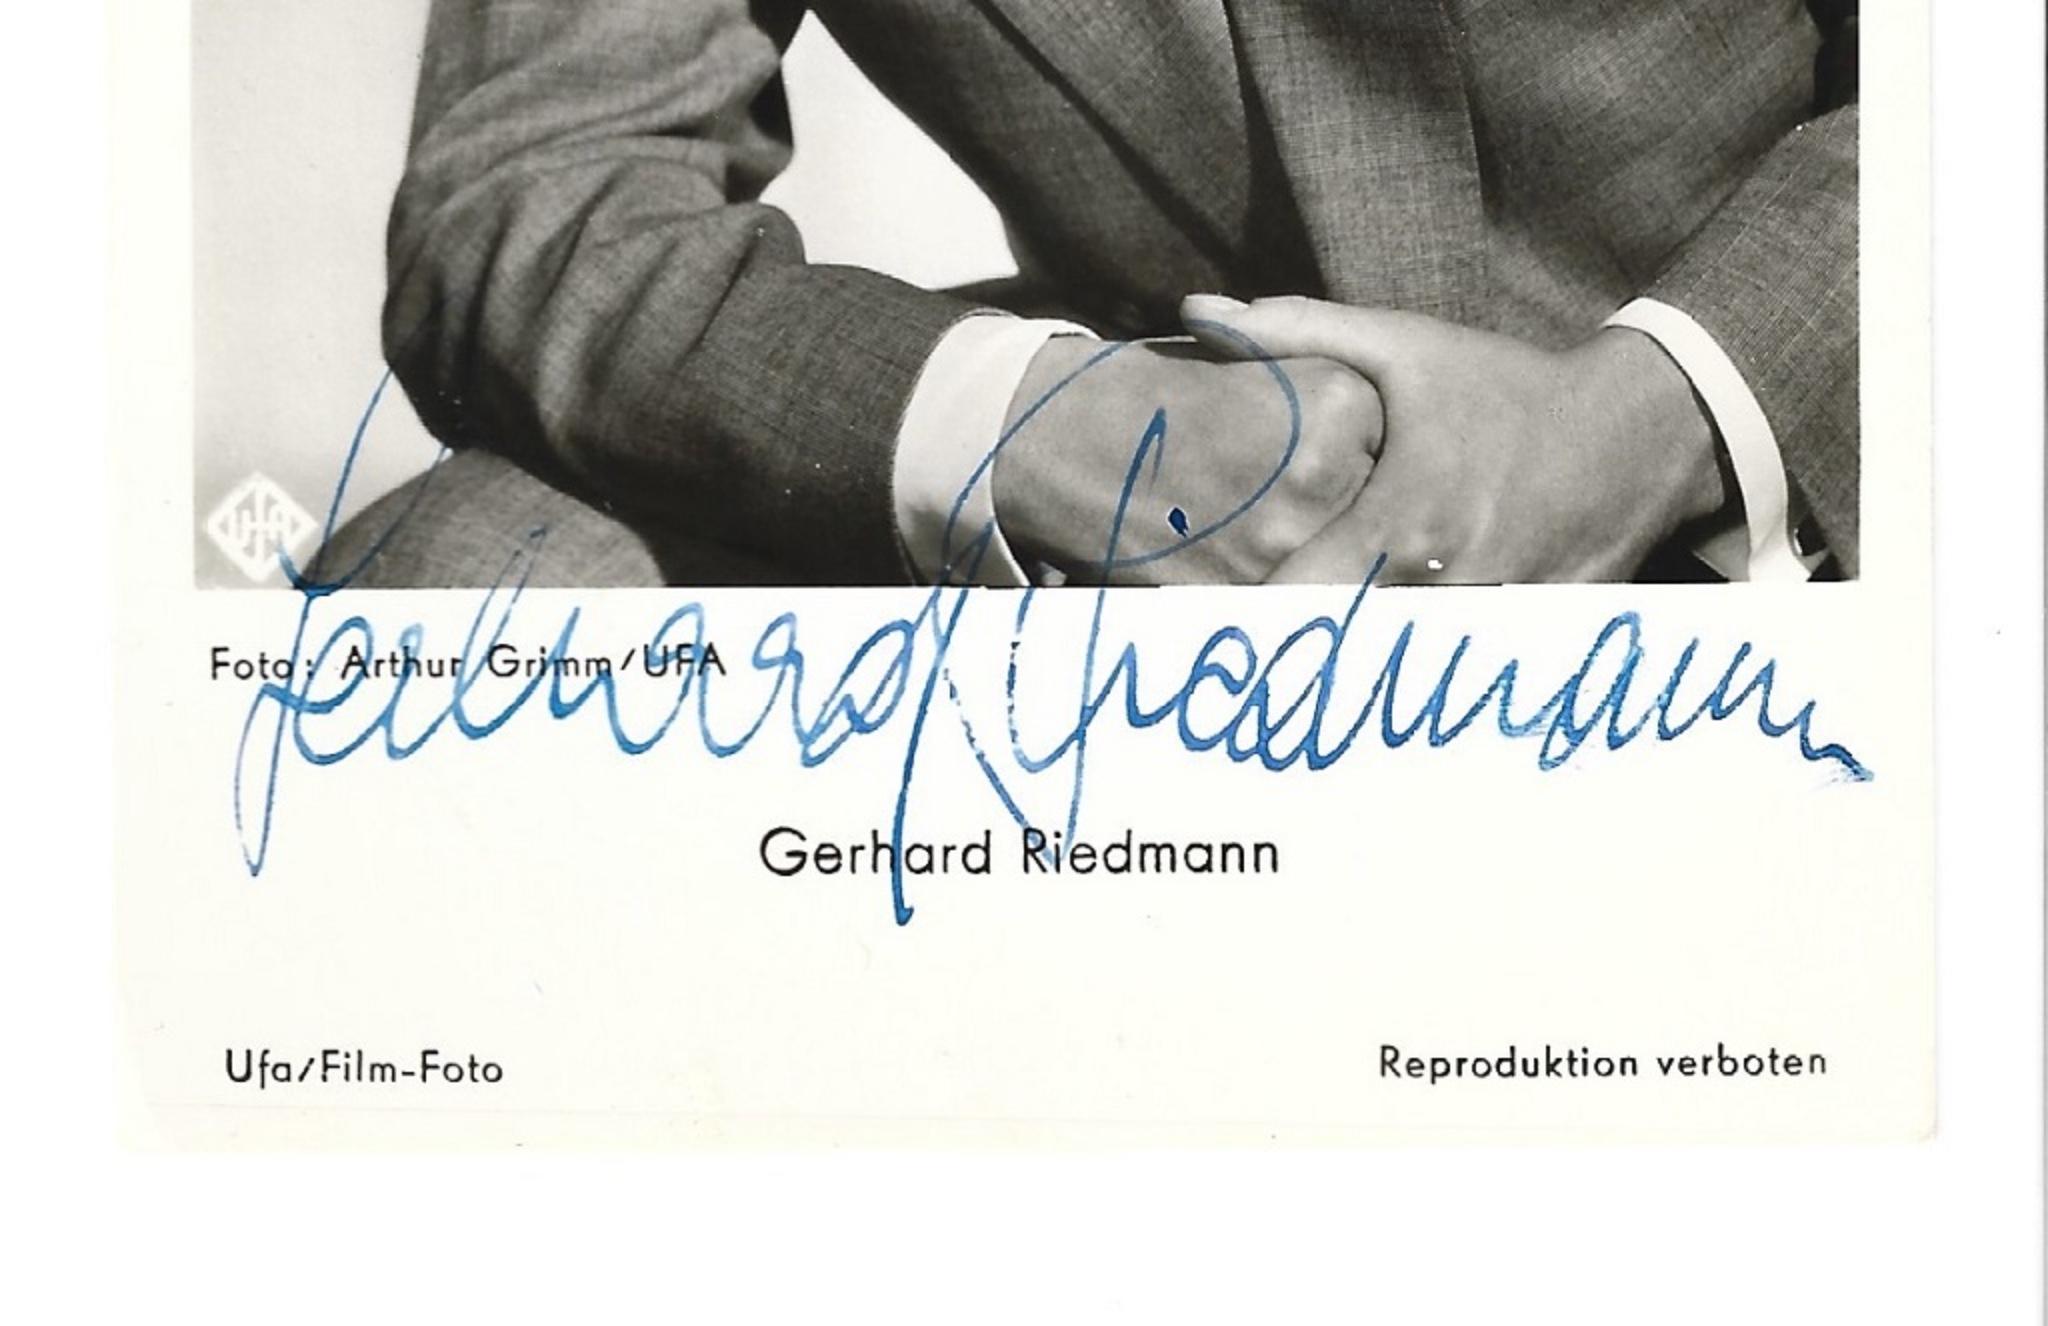 Autographed Postcard by Gerhard Riedmann - Vintage b/w Postcard - 1950s - Photograph by Unknown